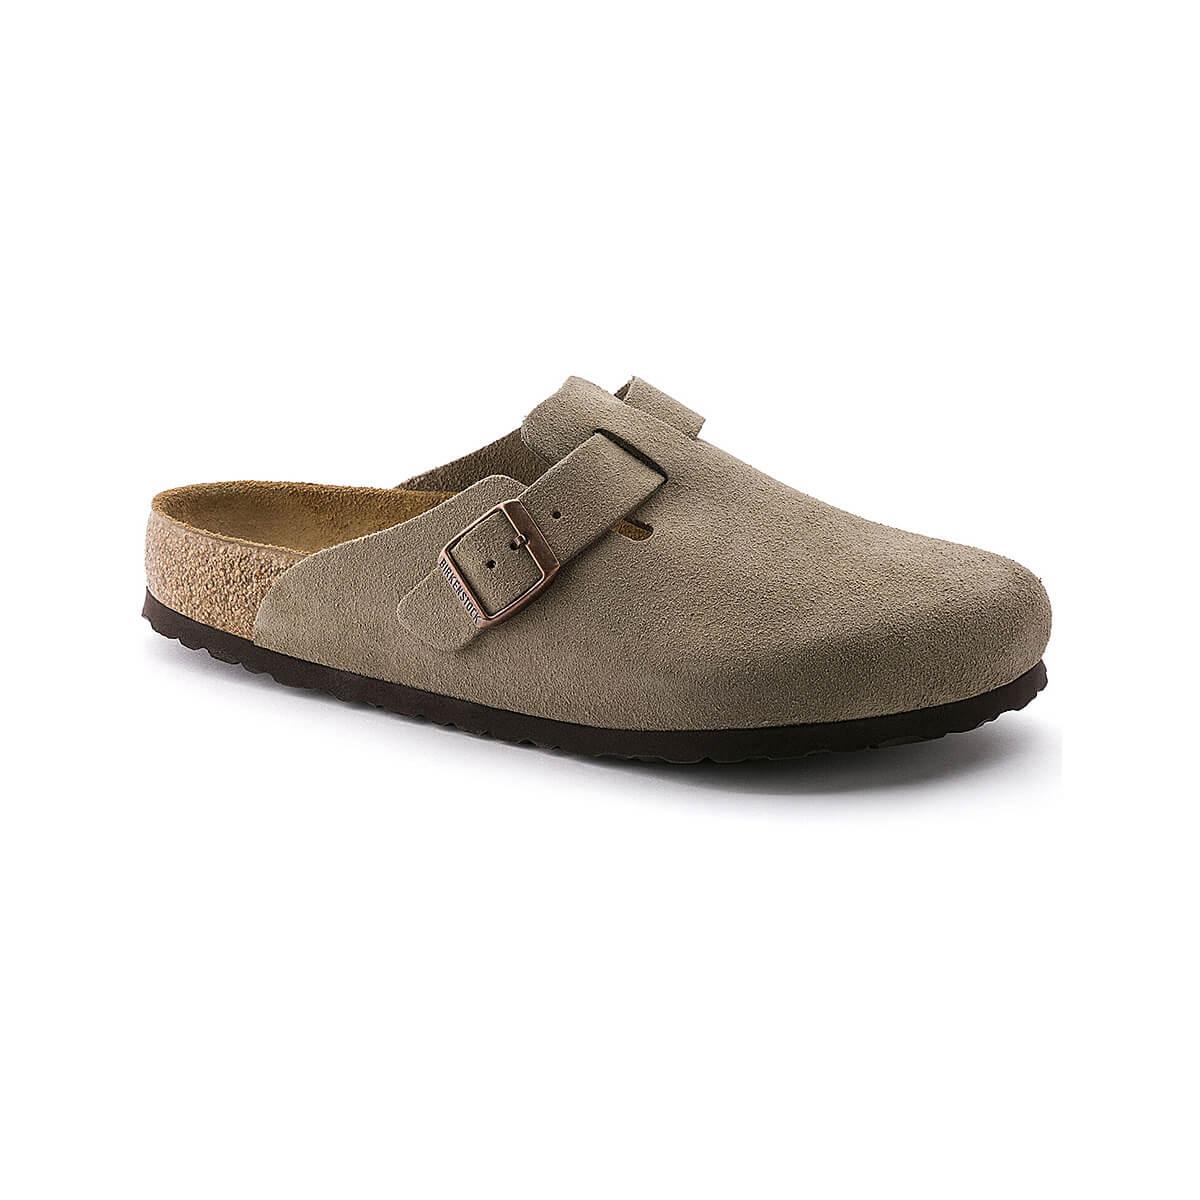  Women's Boston Soft Footbed Clogs